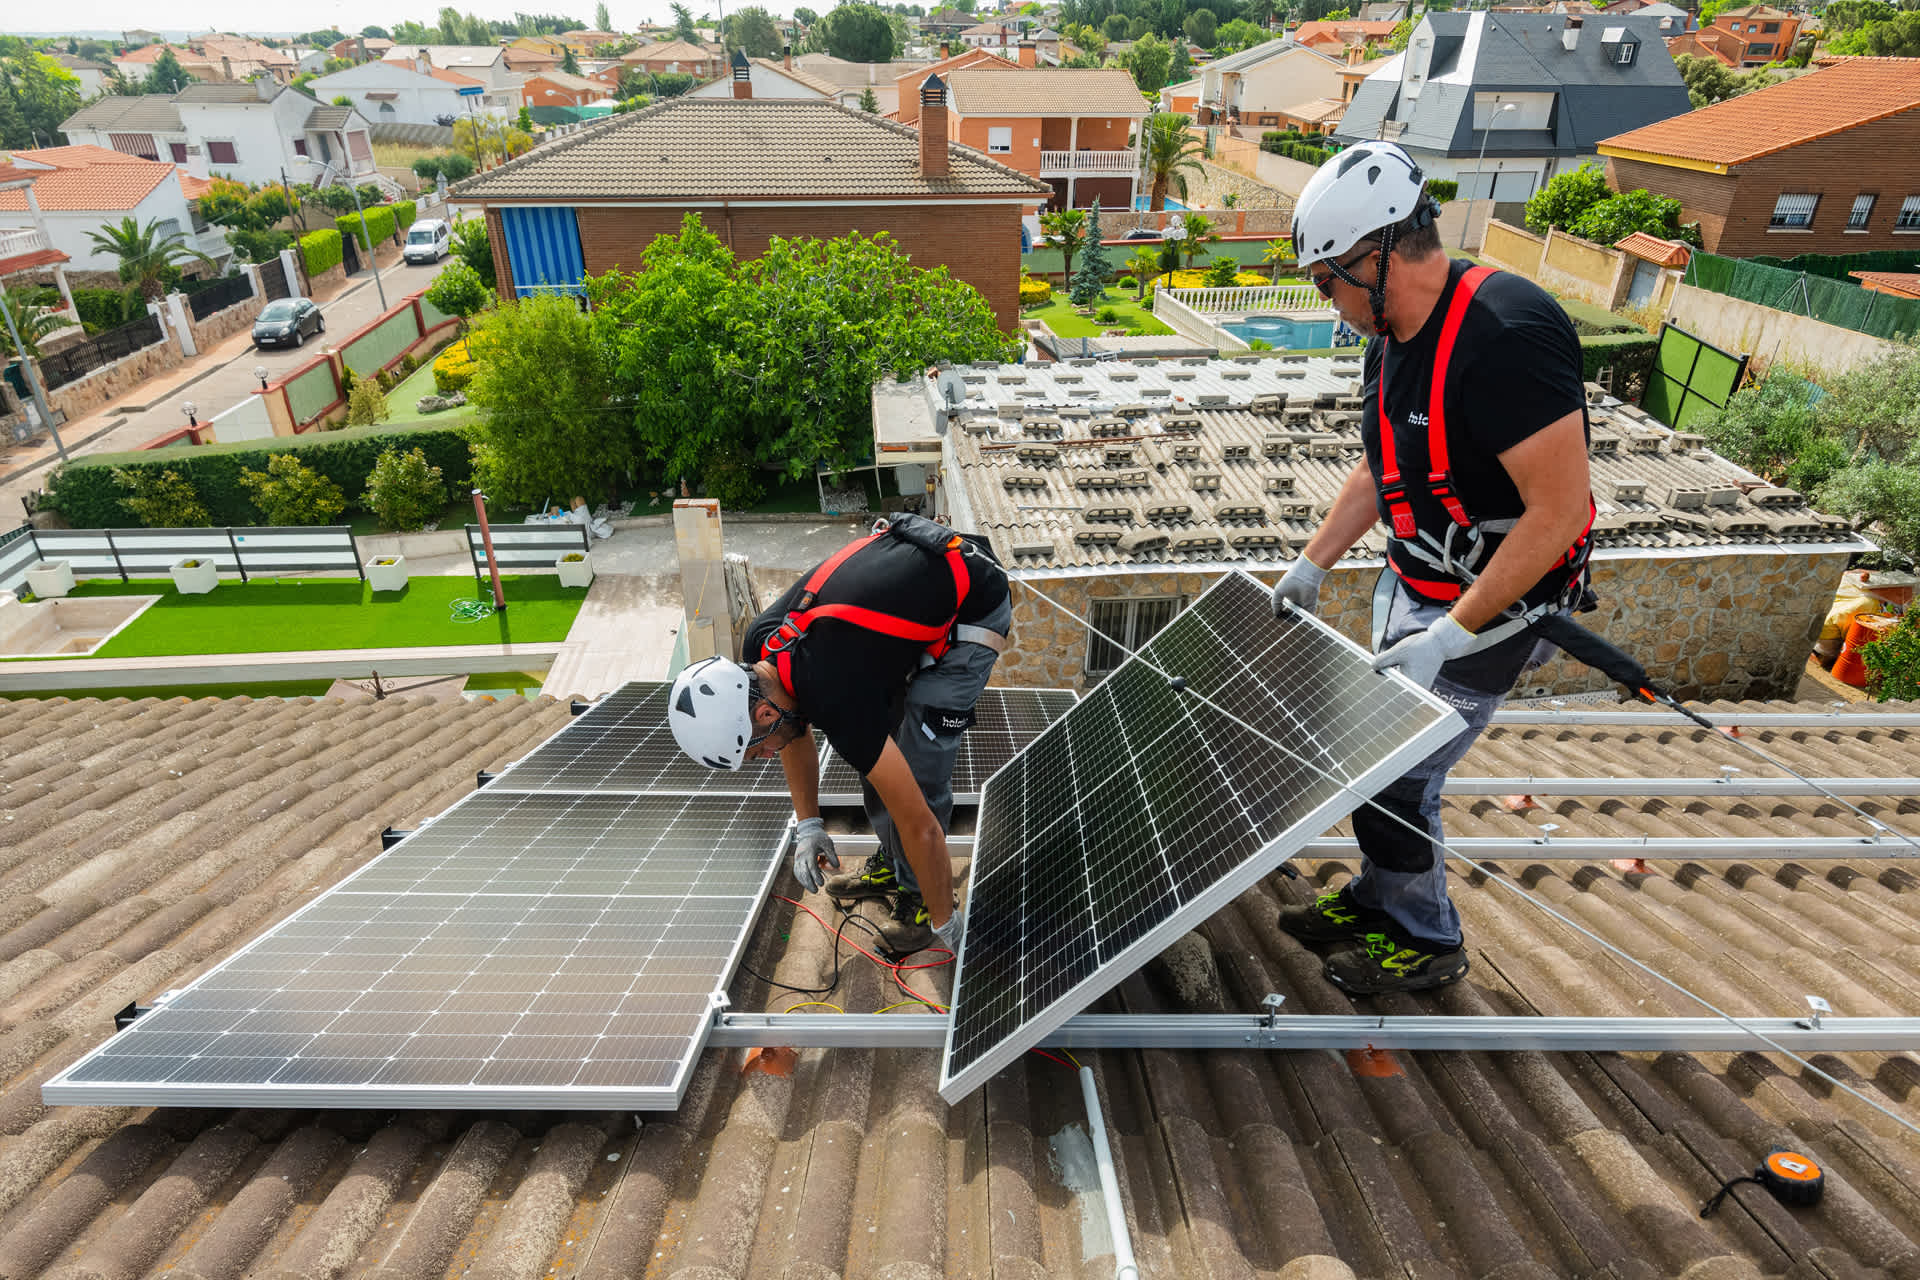 7 Things to Know Before Installing Solar Panels on Your Roof - Bloomberg